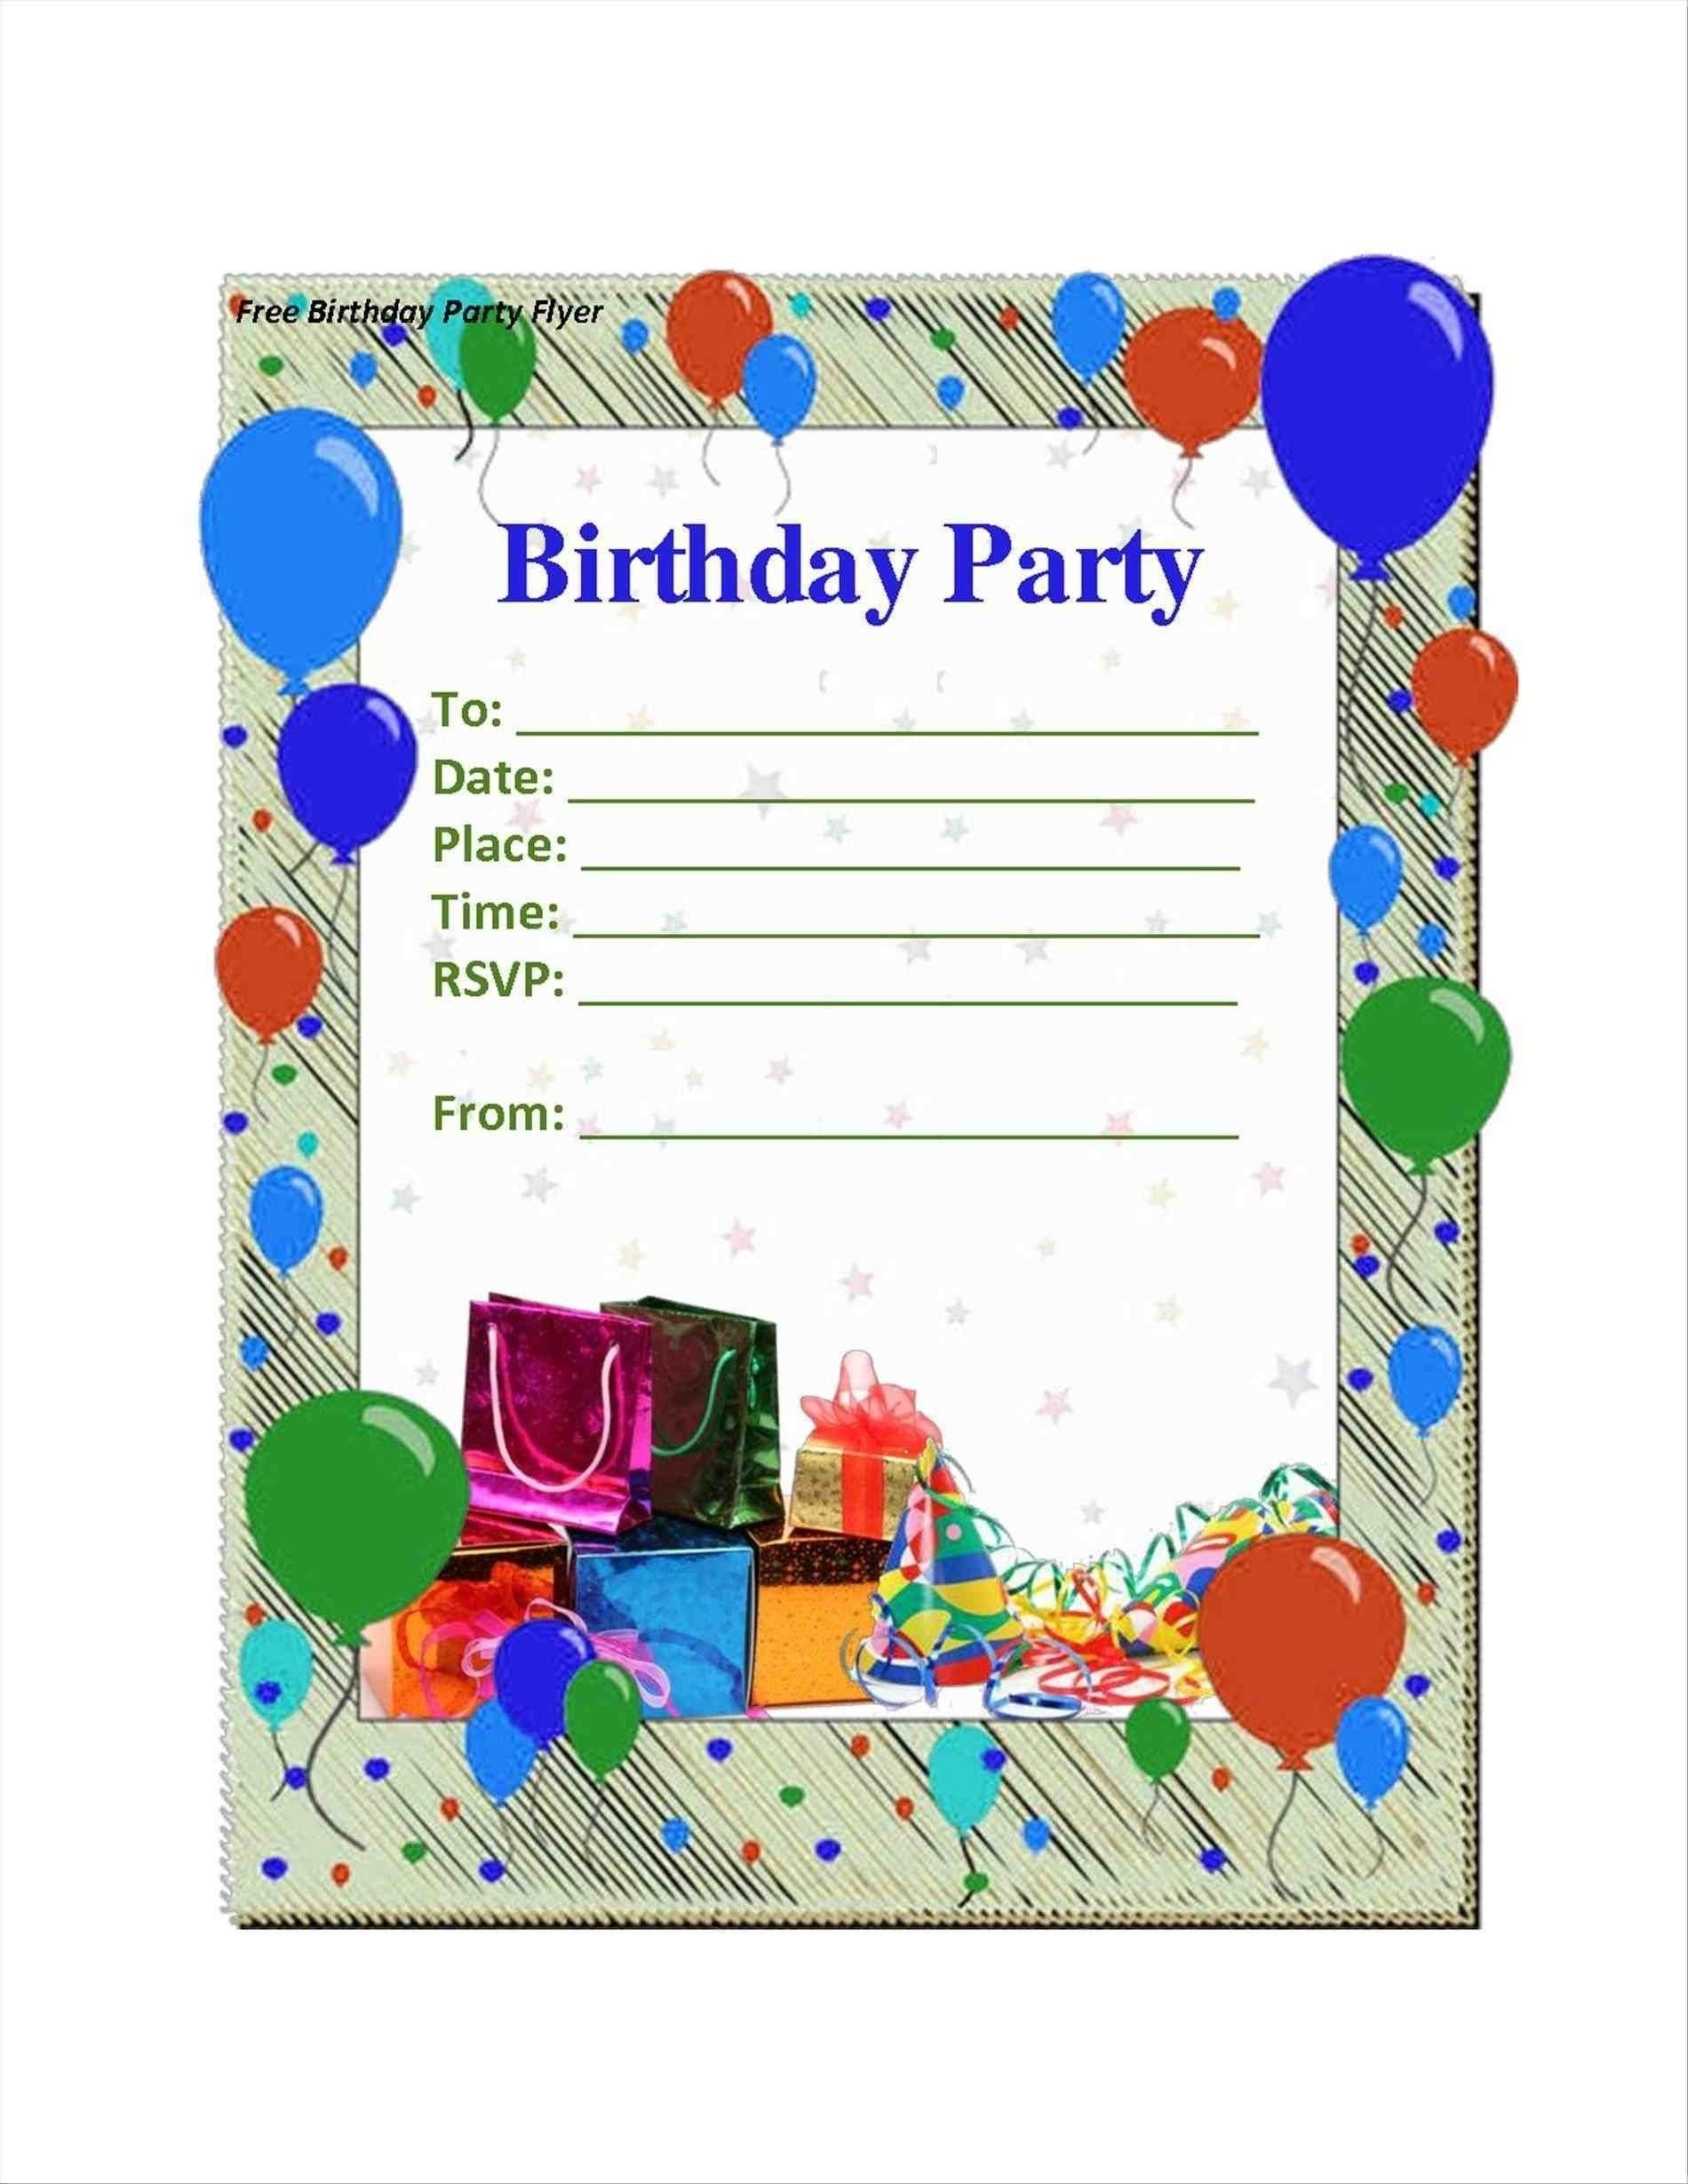 Party Invitation Ideas | Home Design In 2019 | Free Birthday - Free Printable Birthday Party Flyers